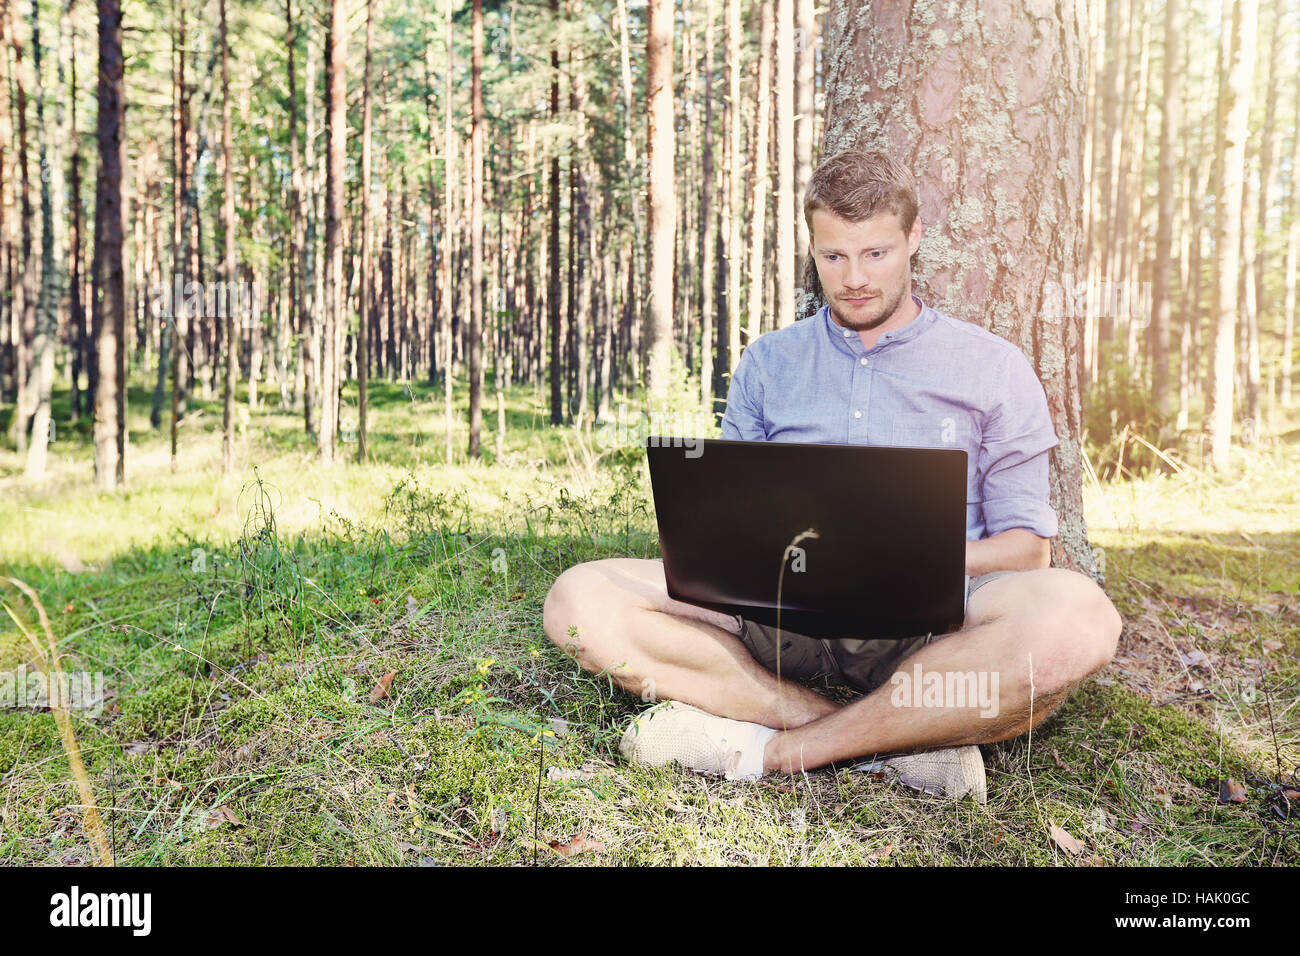 young man working with his laptop outdoors in nature Stock Photo